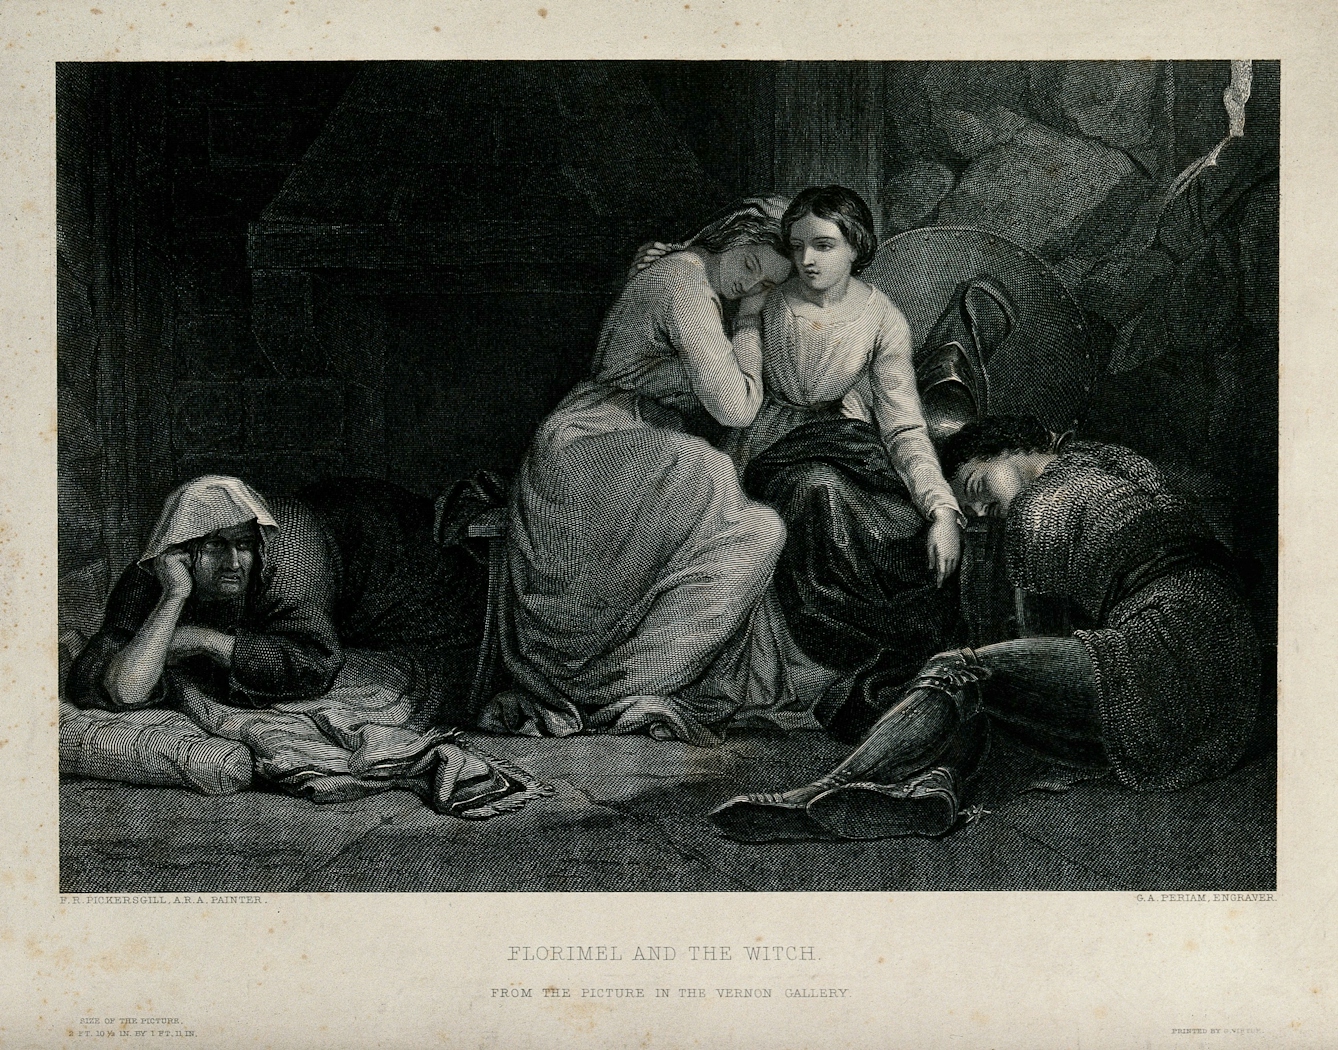 Black and white illustration showing two women embracing, with two men lying on the floor beside them.